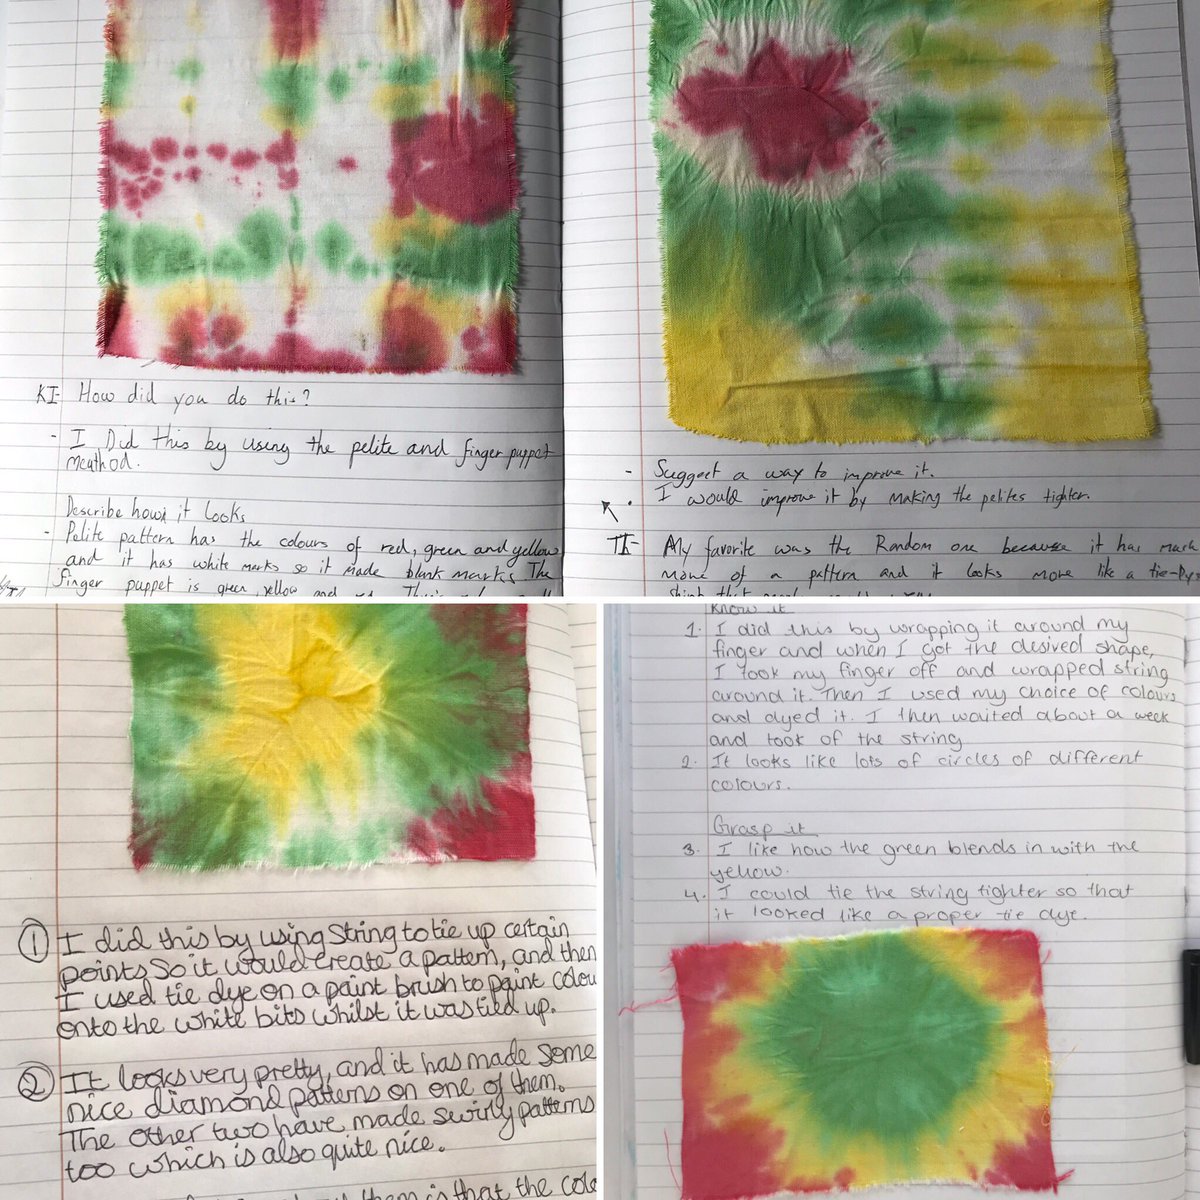 Year 7s have done a great job analysing their Tie Dye samples this afternoon! #ProudOfBDB @BDBSchool